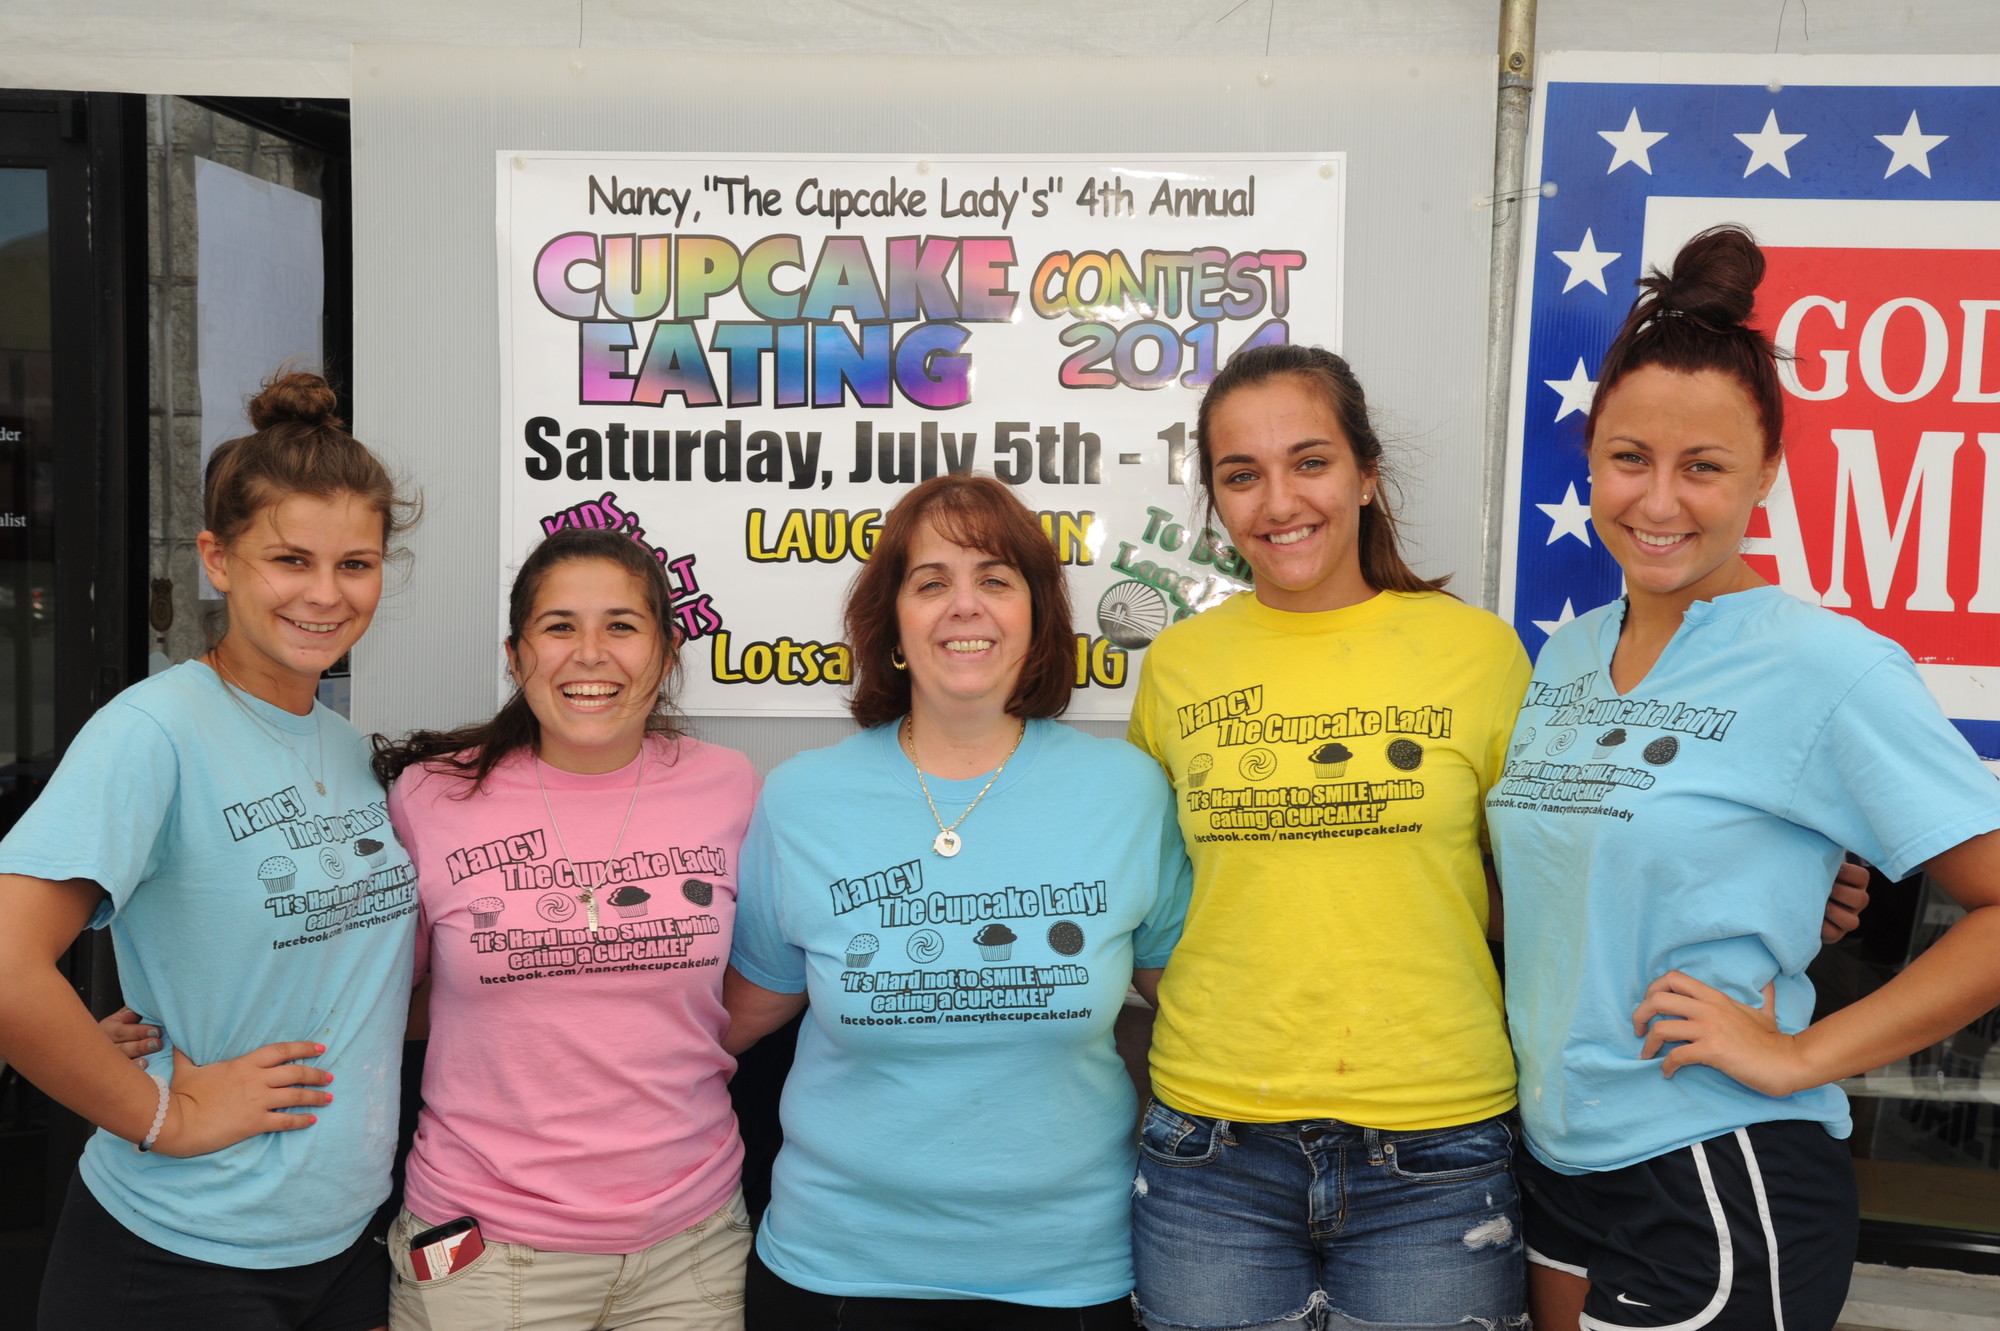 The staff of Nancy, the Cupcake Lady, including, from left, Sierra Scalisi, Cassie Moniodes, owner Nancy Moniodes, Julia Neugebaube and Angela Bombara, welcomed contestants.